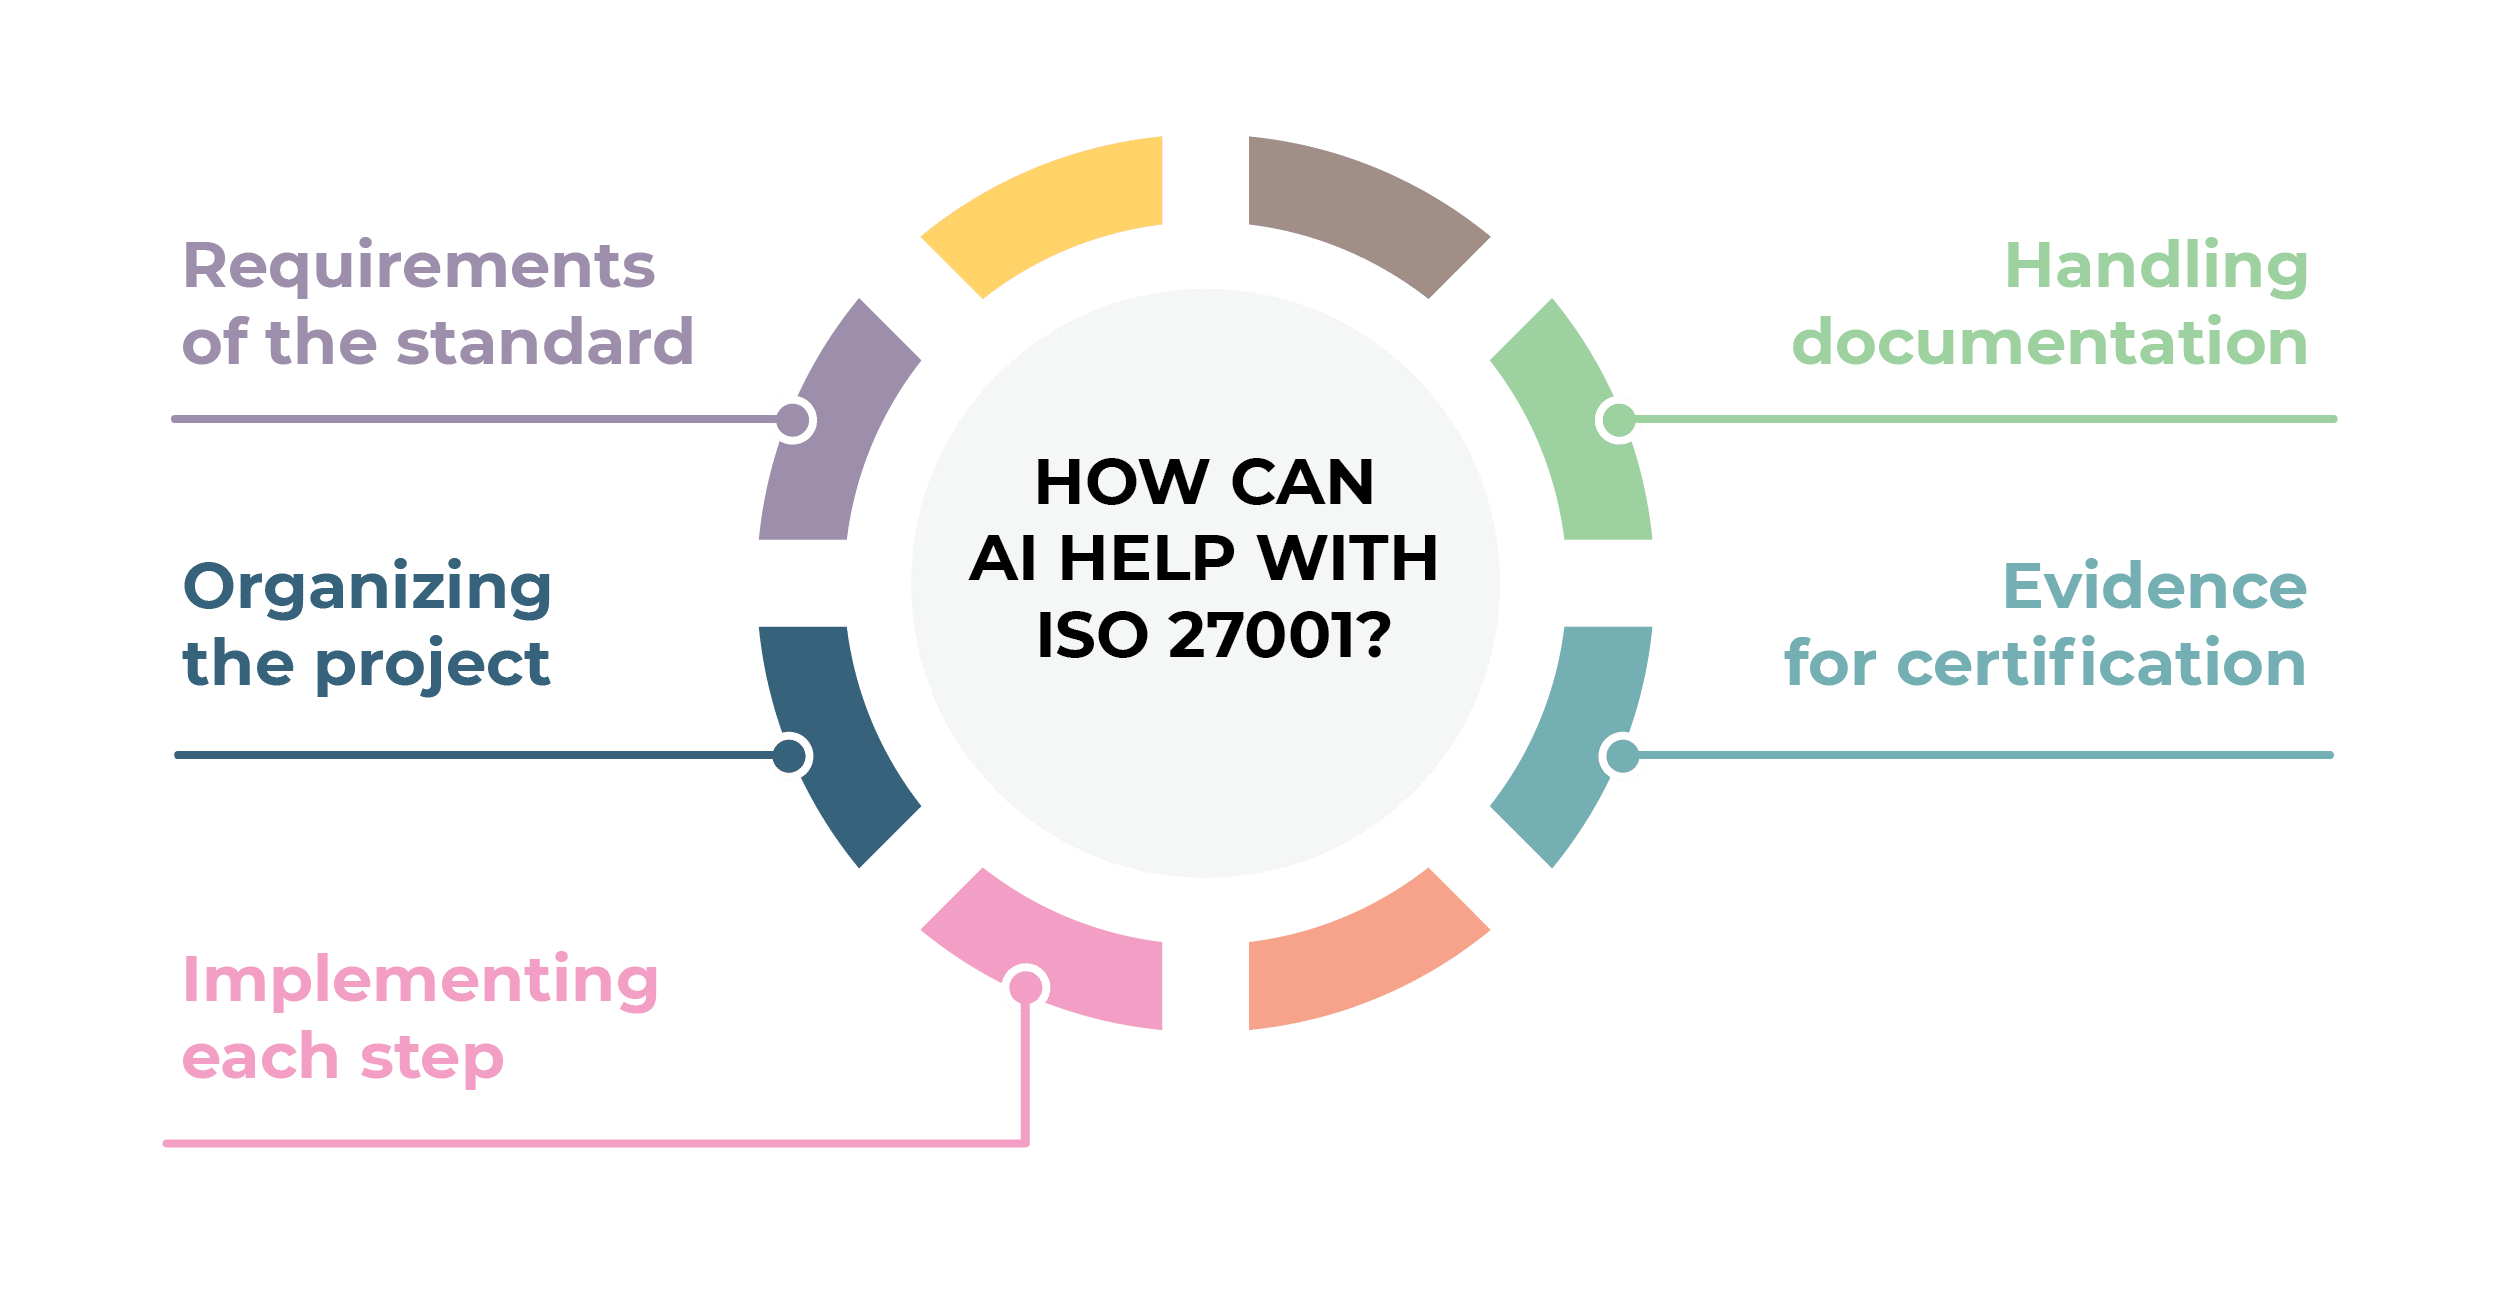 How to implement ISO 27001 using generative AI - 27001Academy